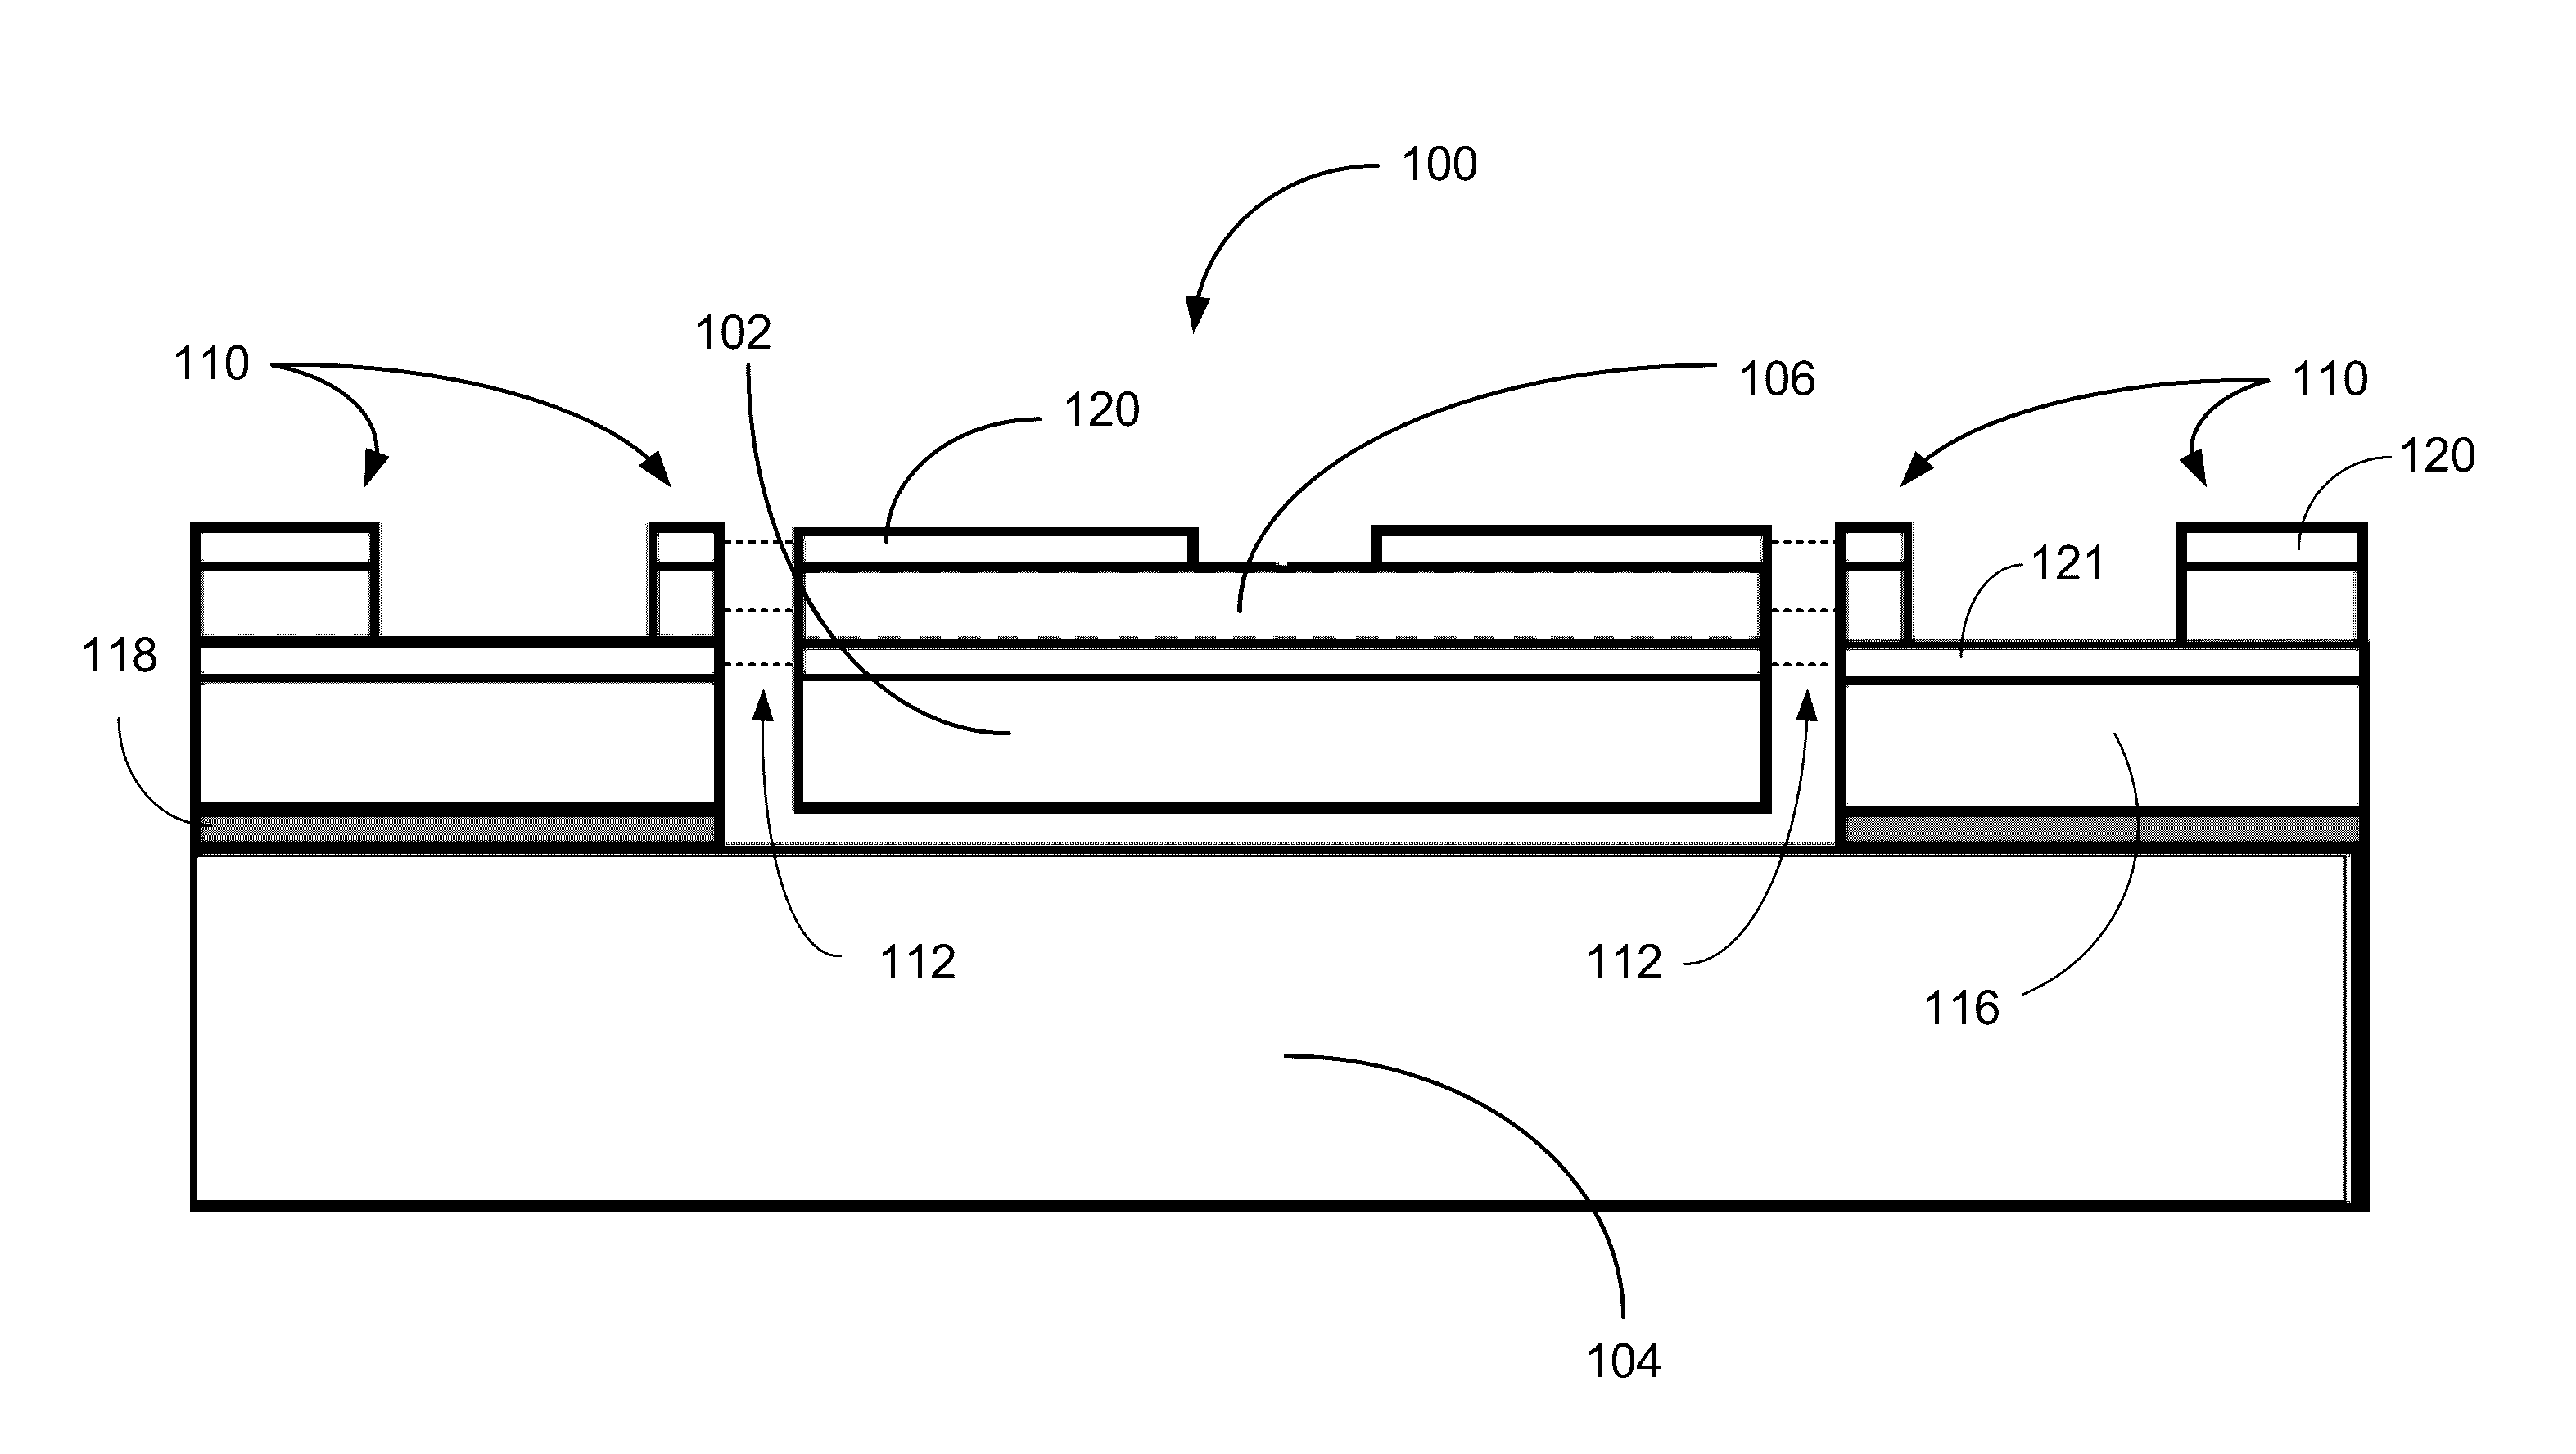 Resonant gyroscopes and methods of making and using the same